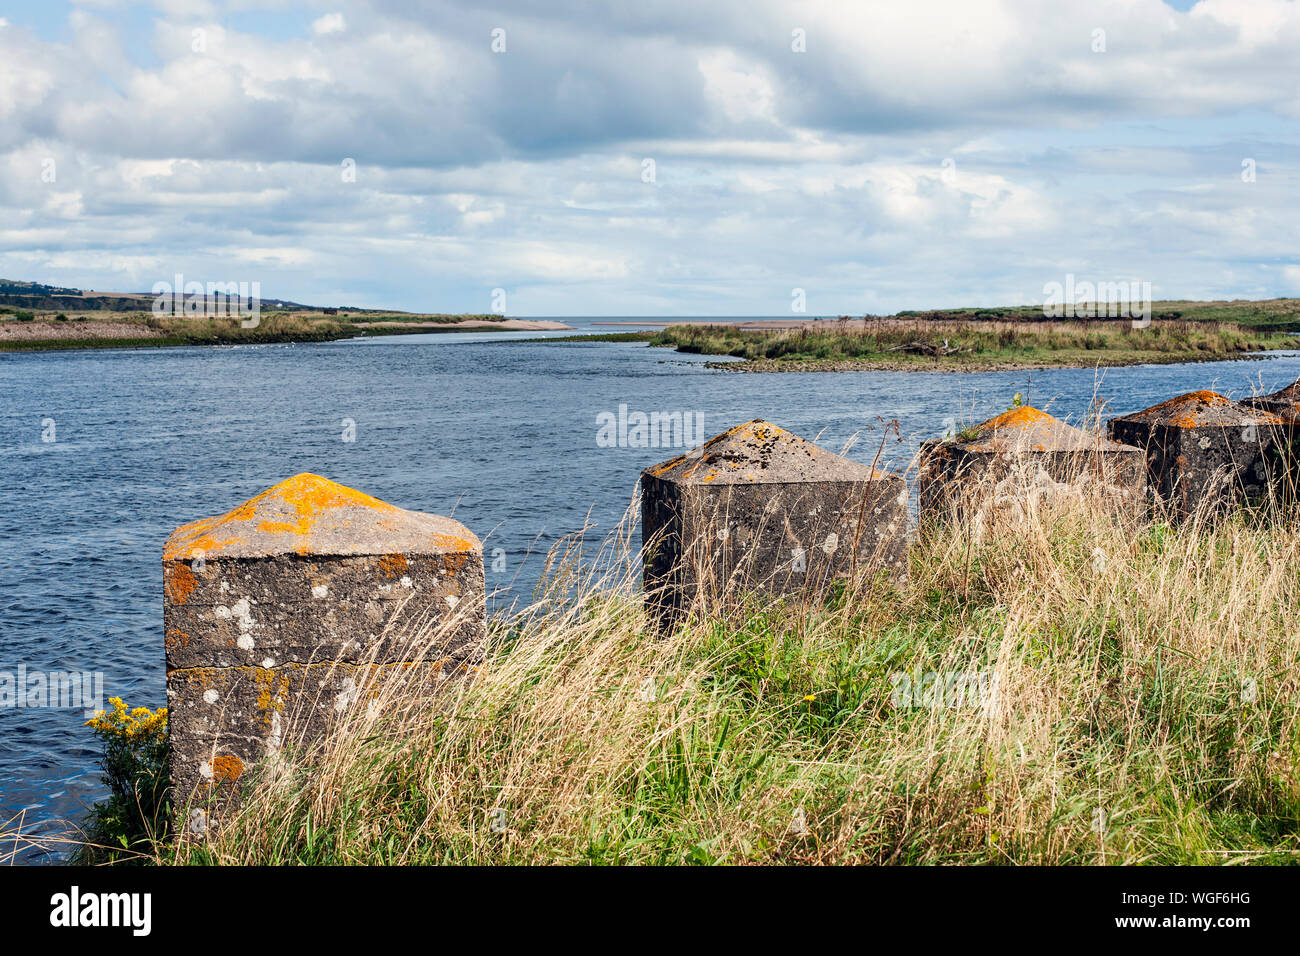 Second World War concrete sea defences on the mouth of the river North Esk, Angus, Scotland, UK with view out to sea. Stock Photo